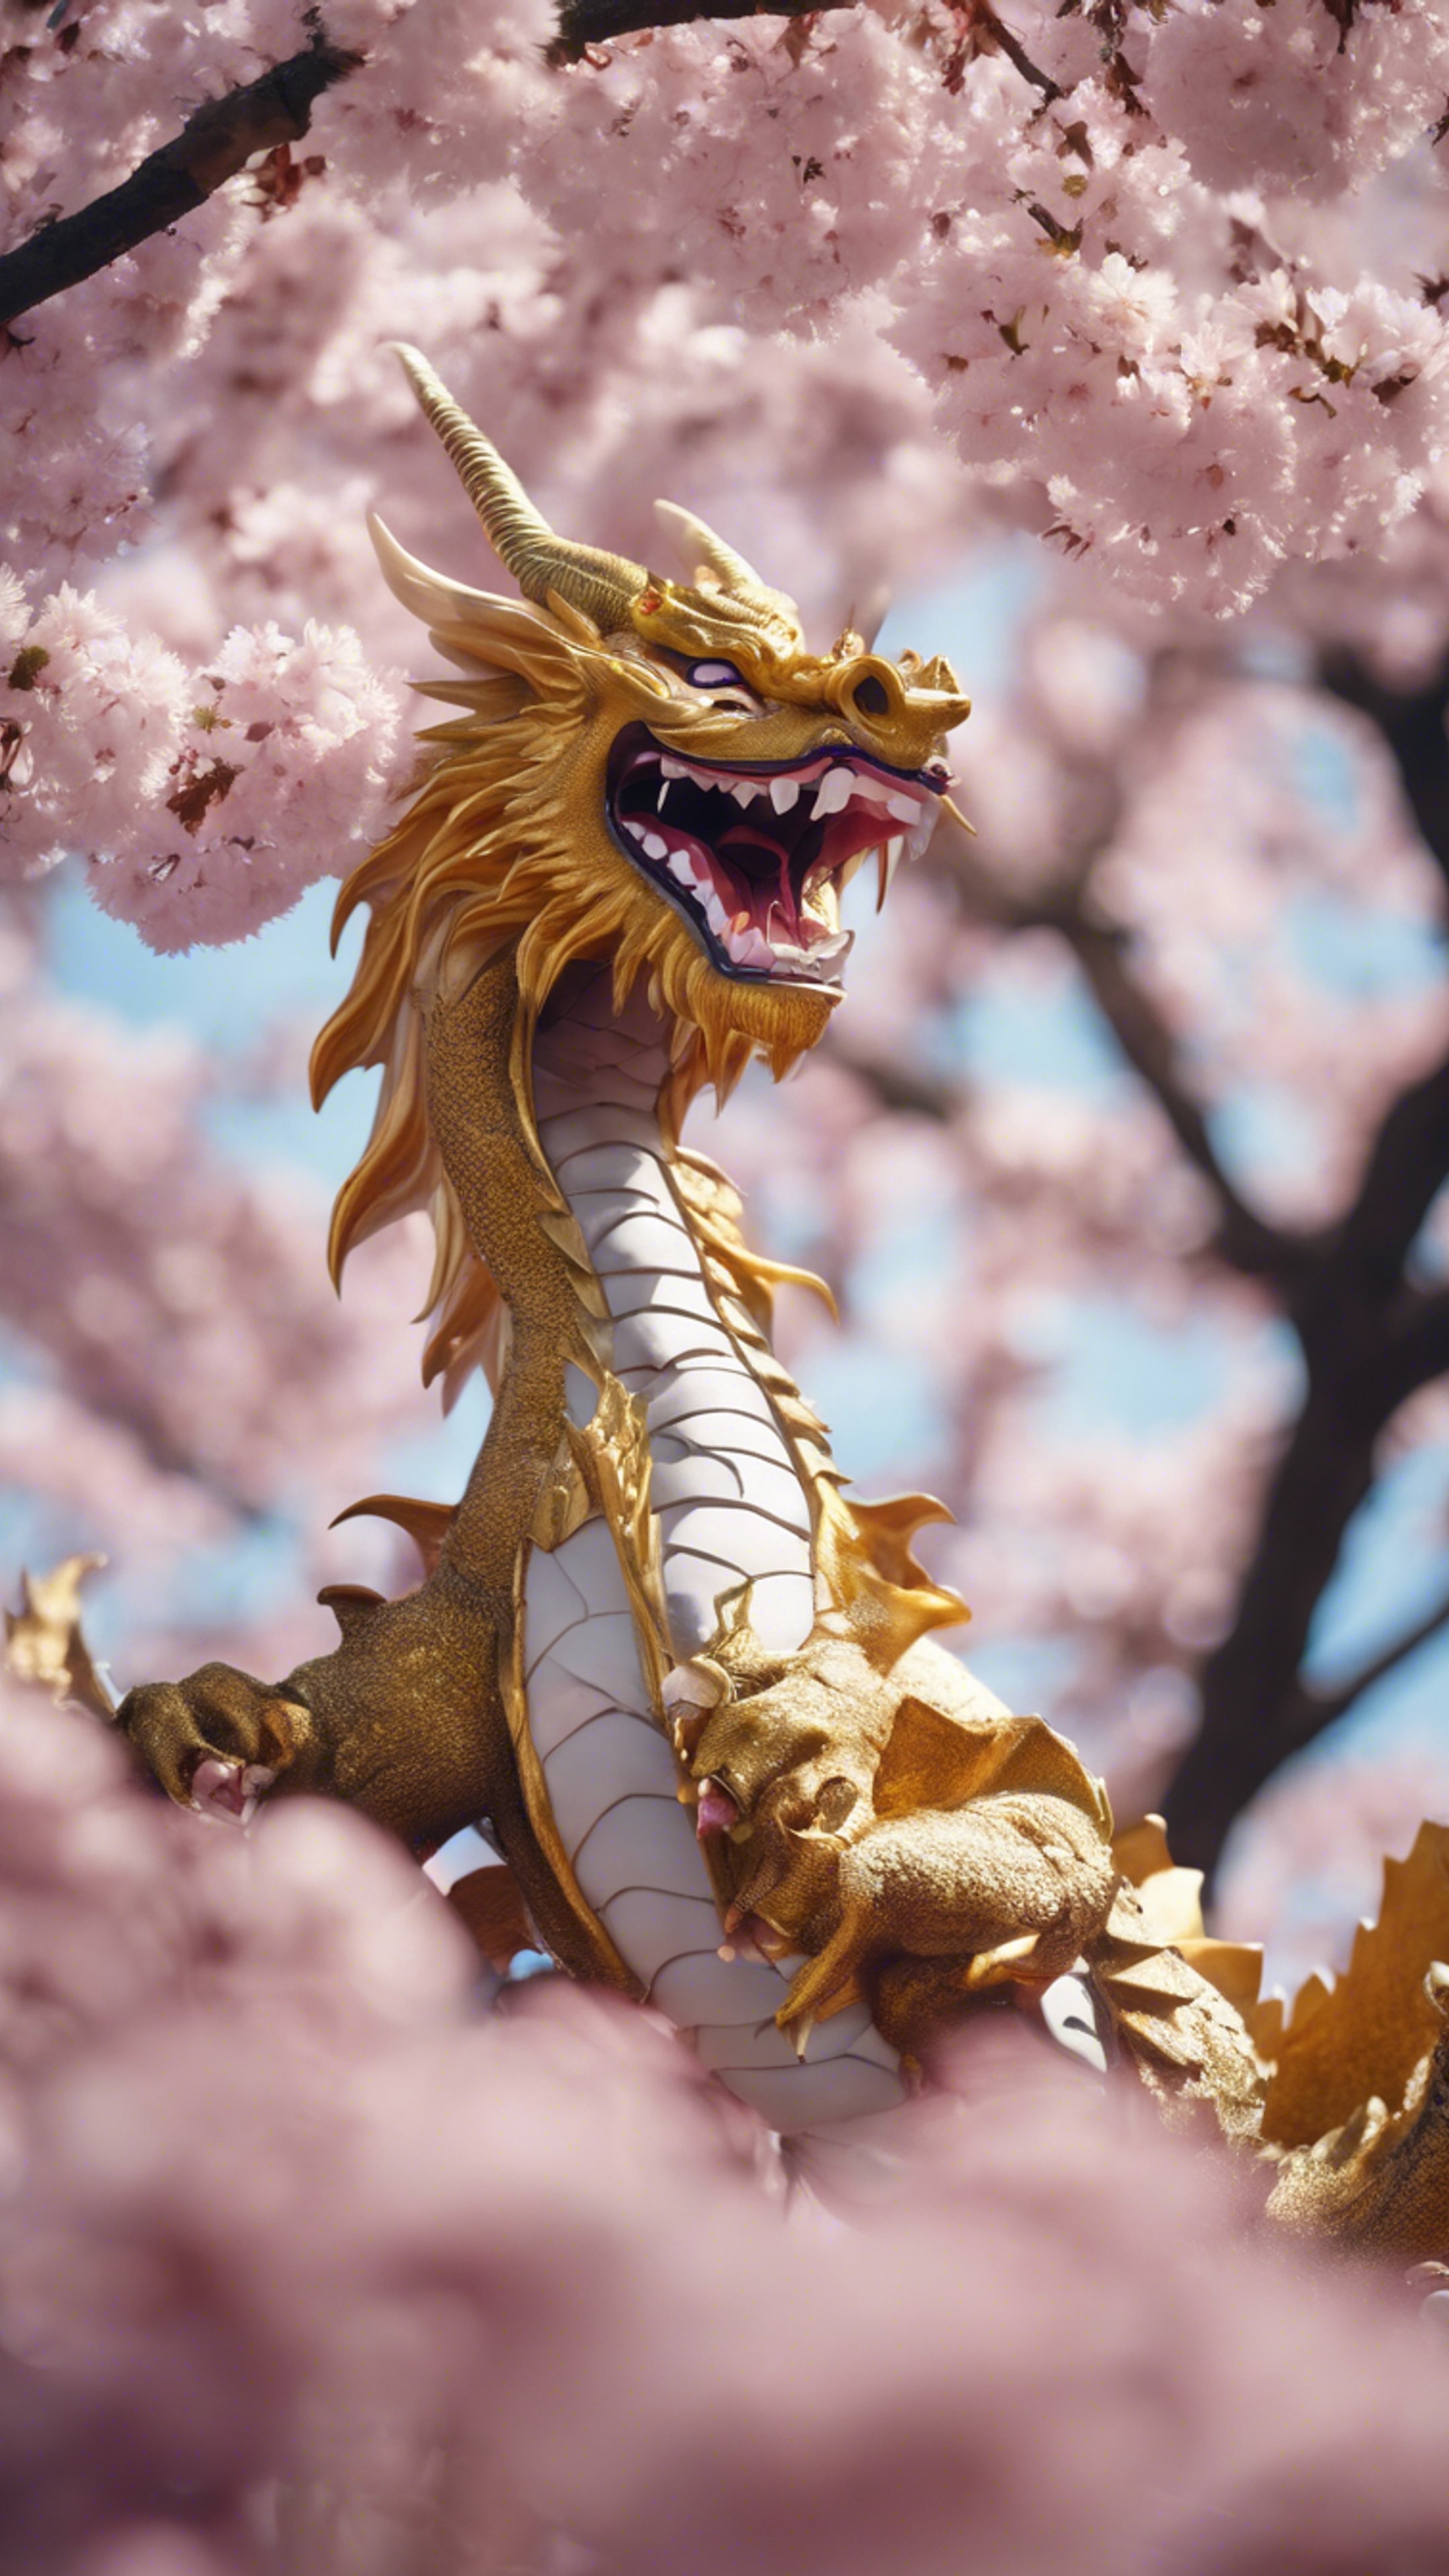 A playful Japanese dragon frolicking in the cherry blossom festival. Fond d'écran[dfac1438ceb04769bc5b]